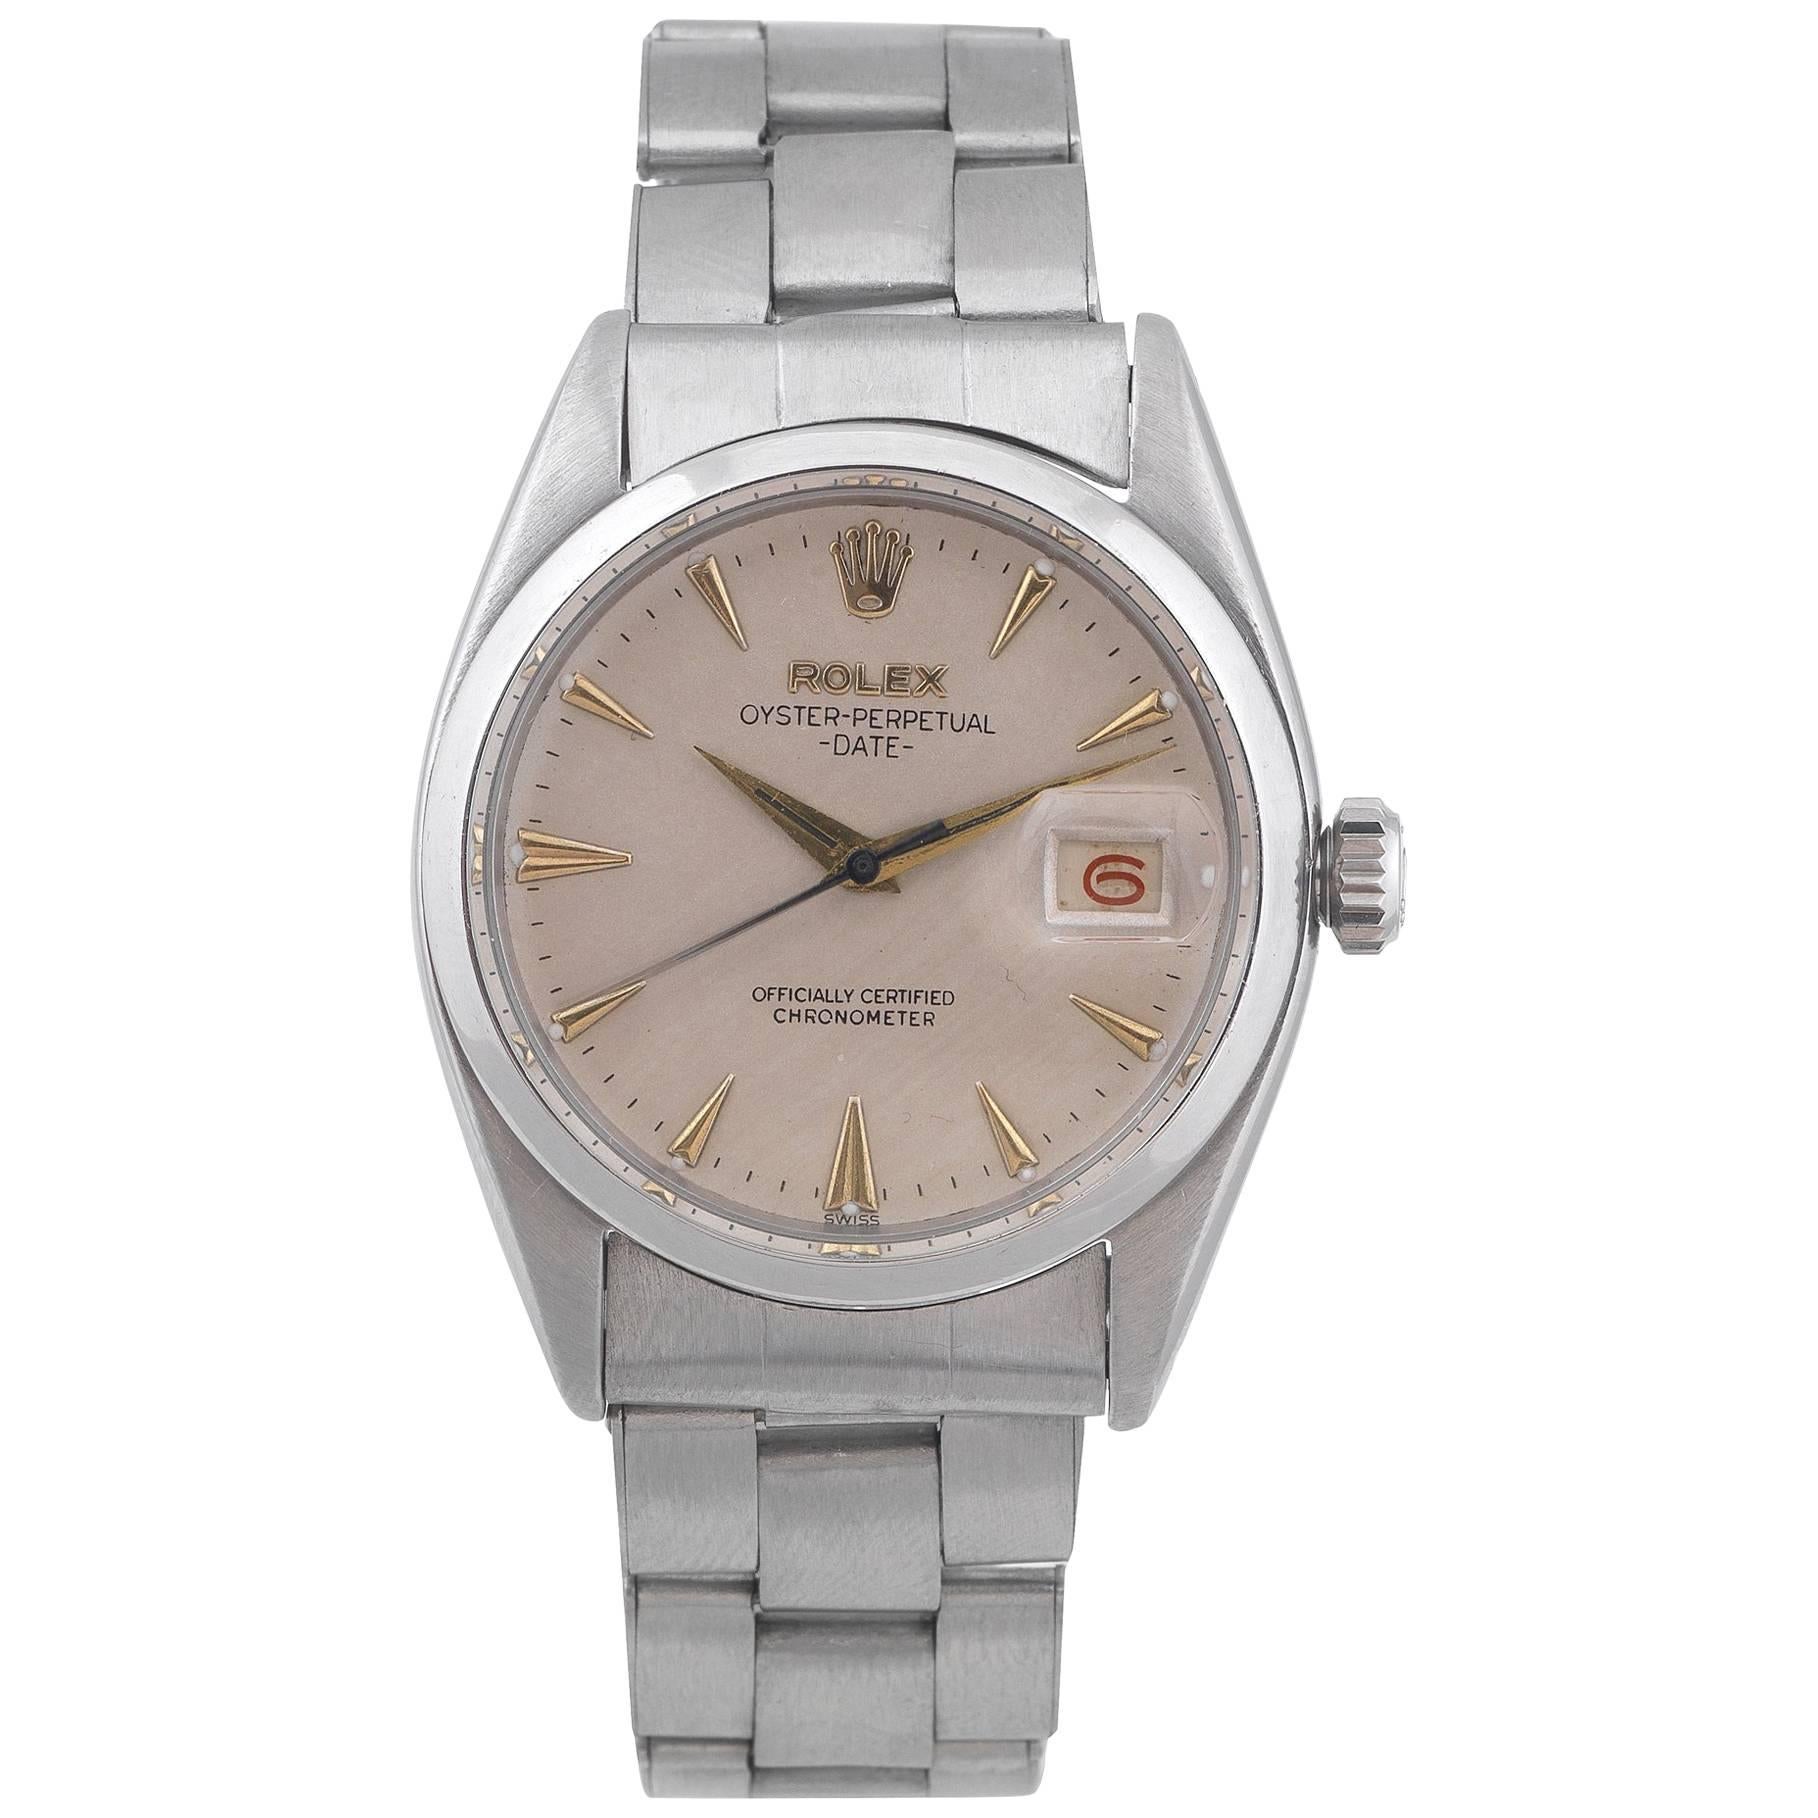 Rolex Stainless Steel Oyster Perpetual Date self-winding Wristwatch, circa 1957